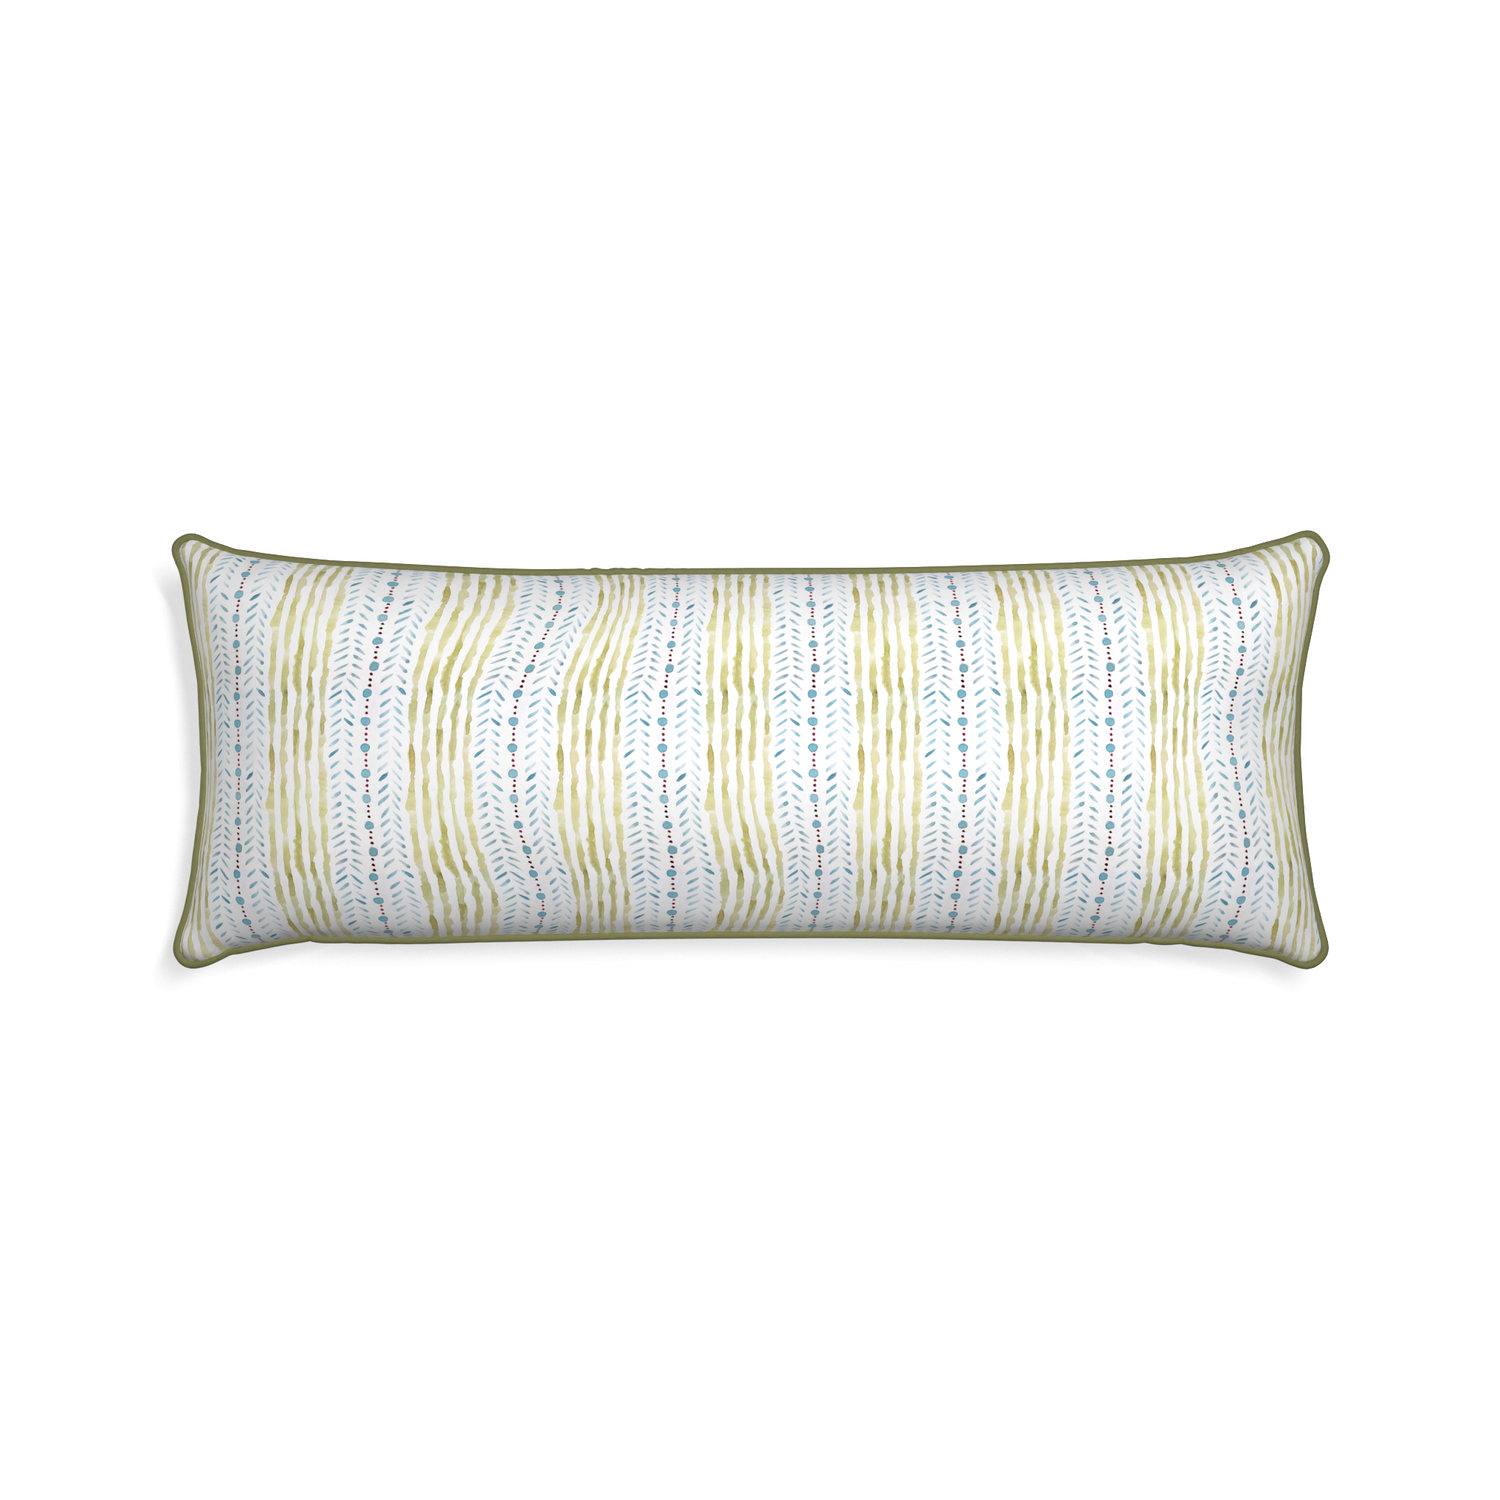 rectangle blue and green striped pillow with moss green piping